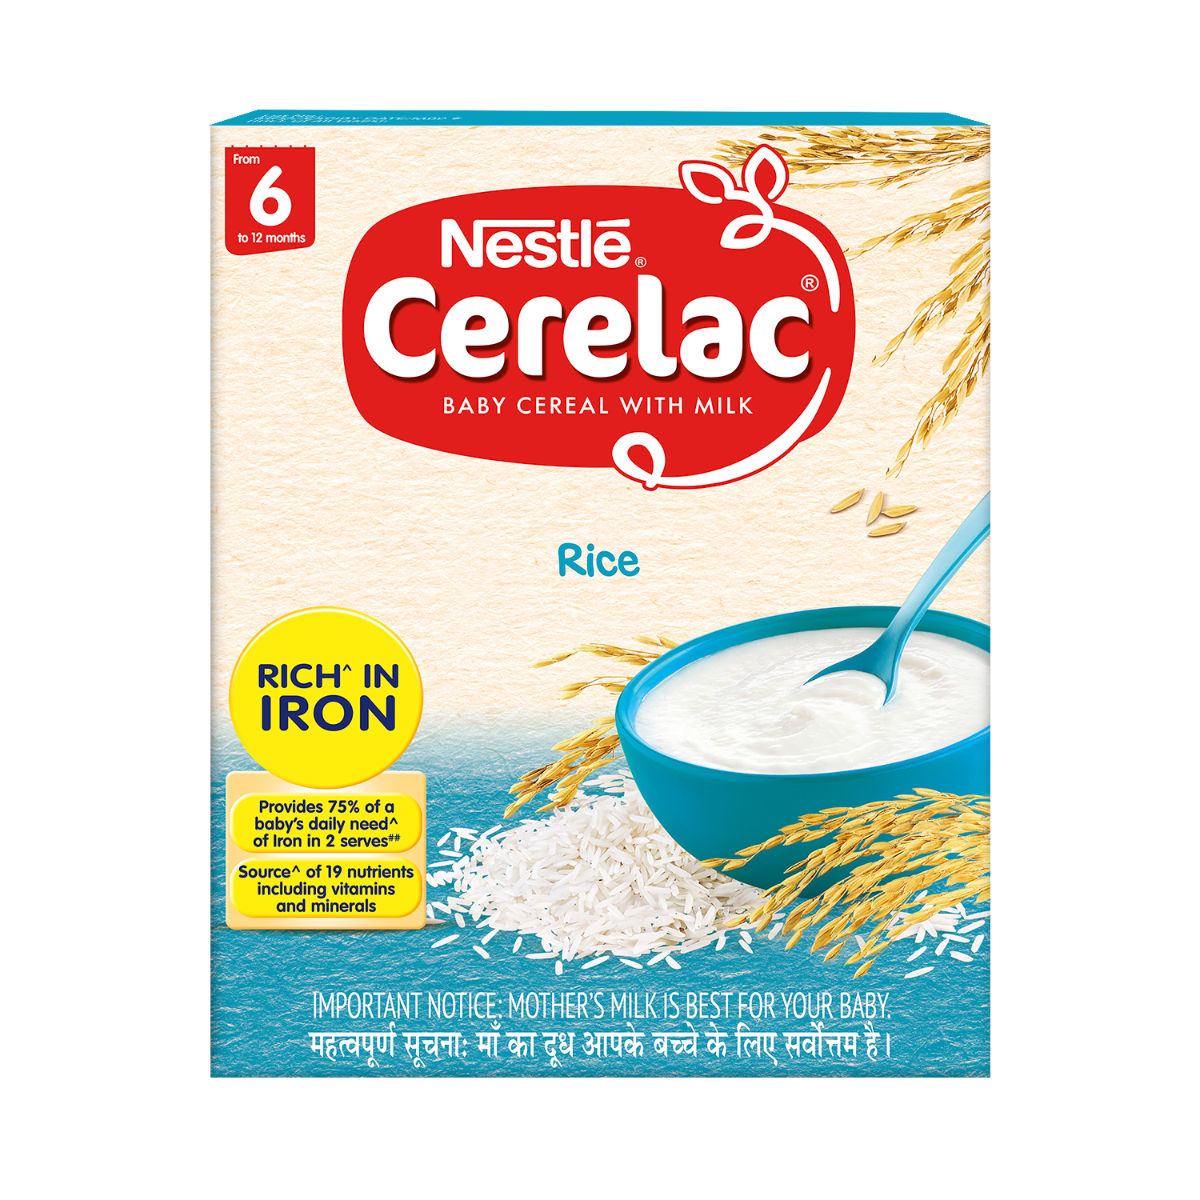 Buy Nestle Cerelac Baby Cereal with Milk Wheat Rice (From 6 to 12 Months) Powder, 300 gm Refill Pack Online